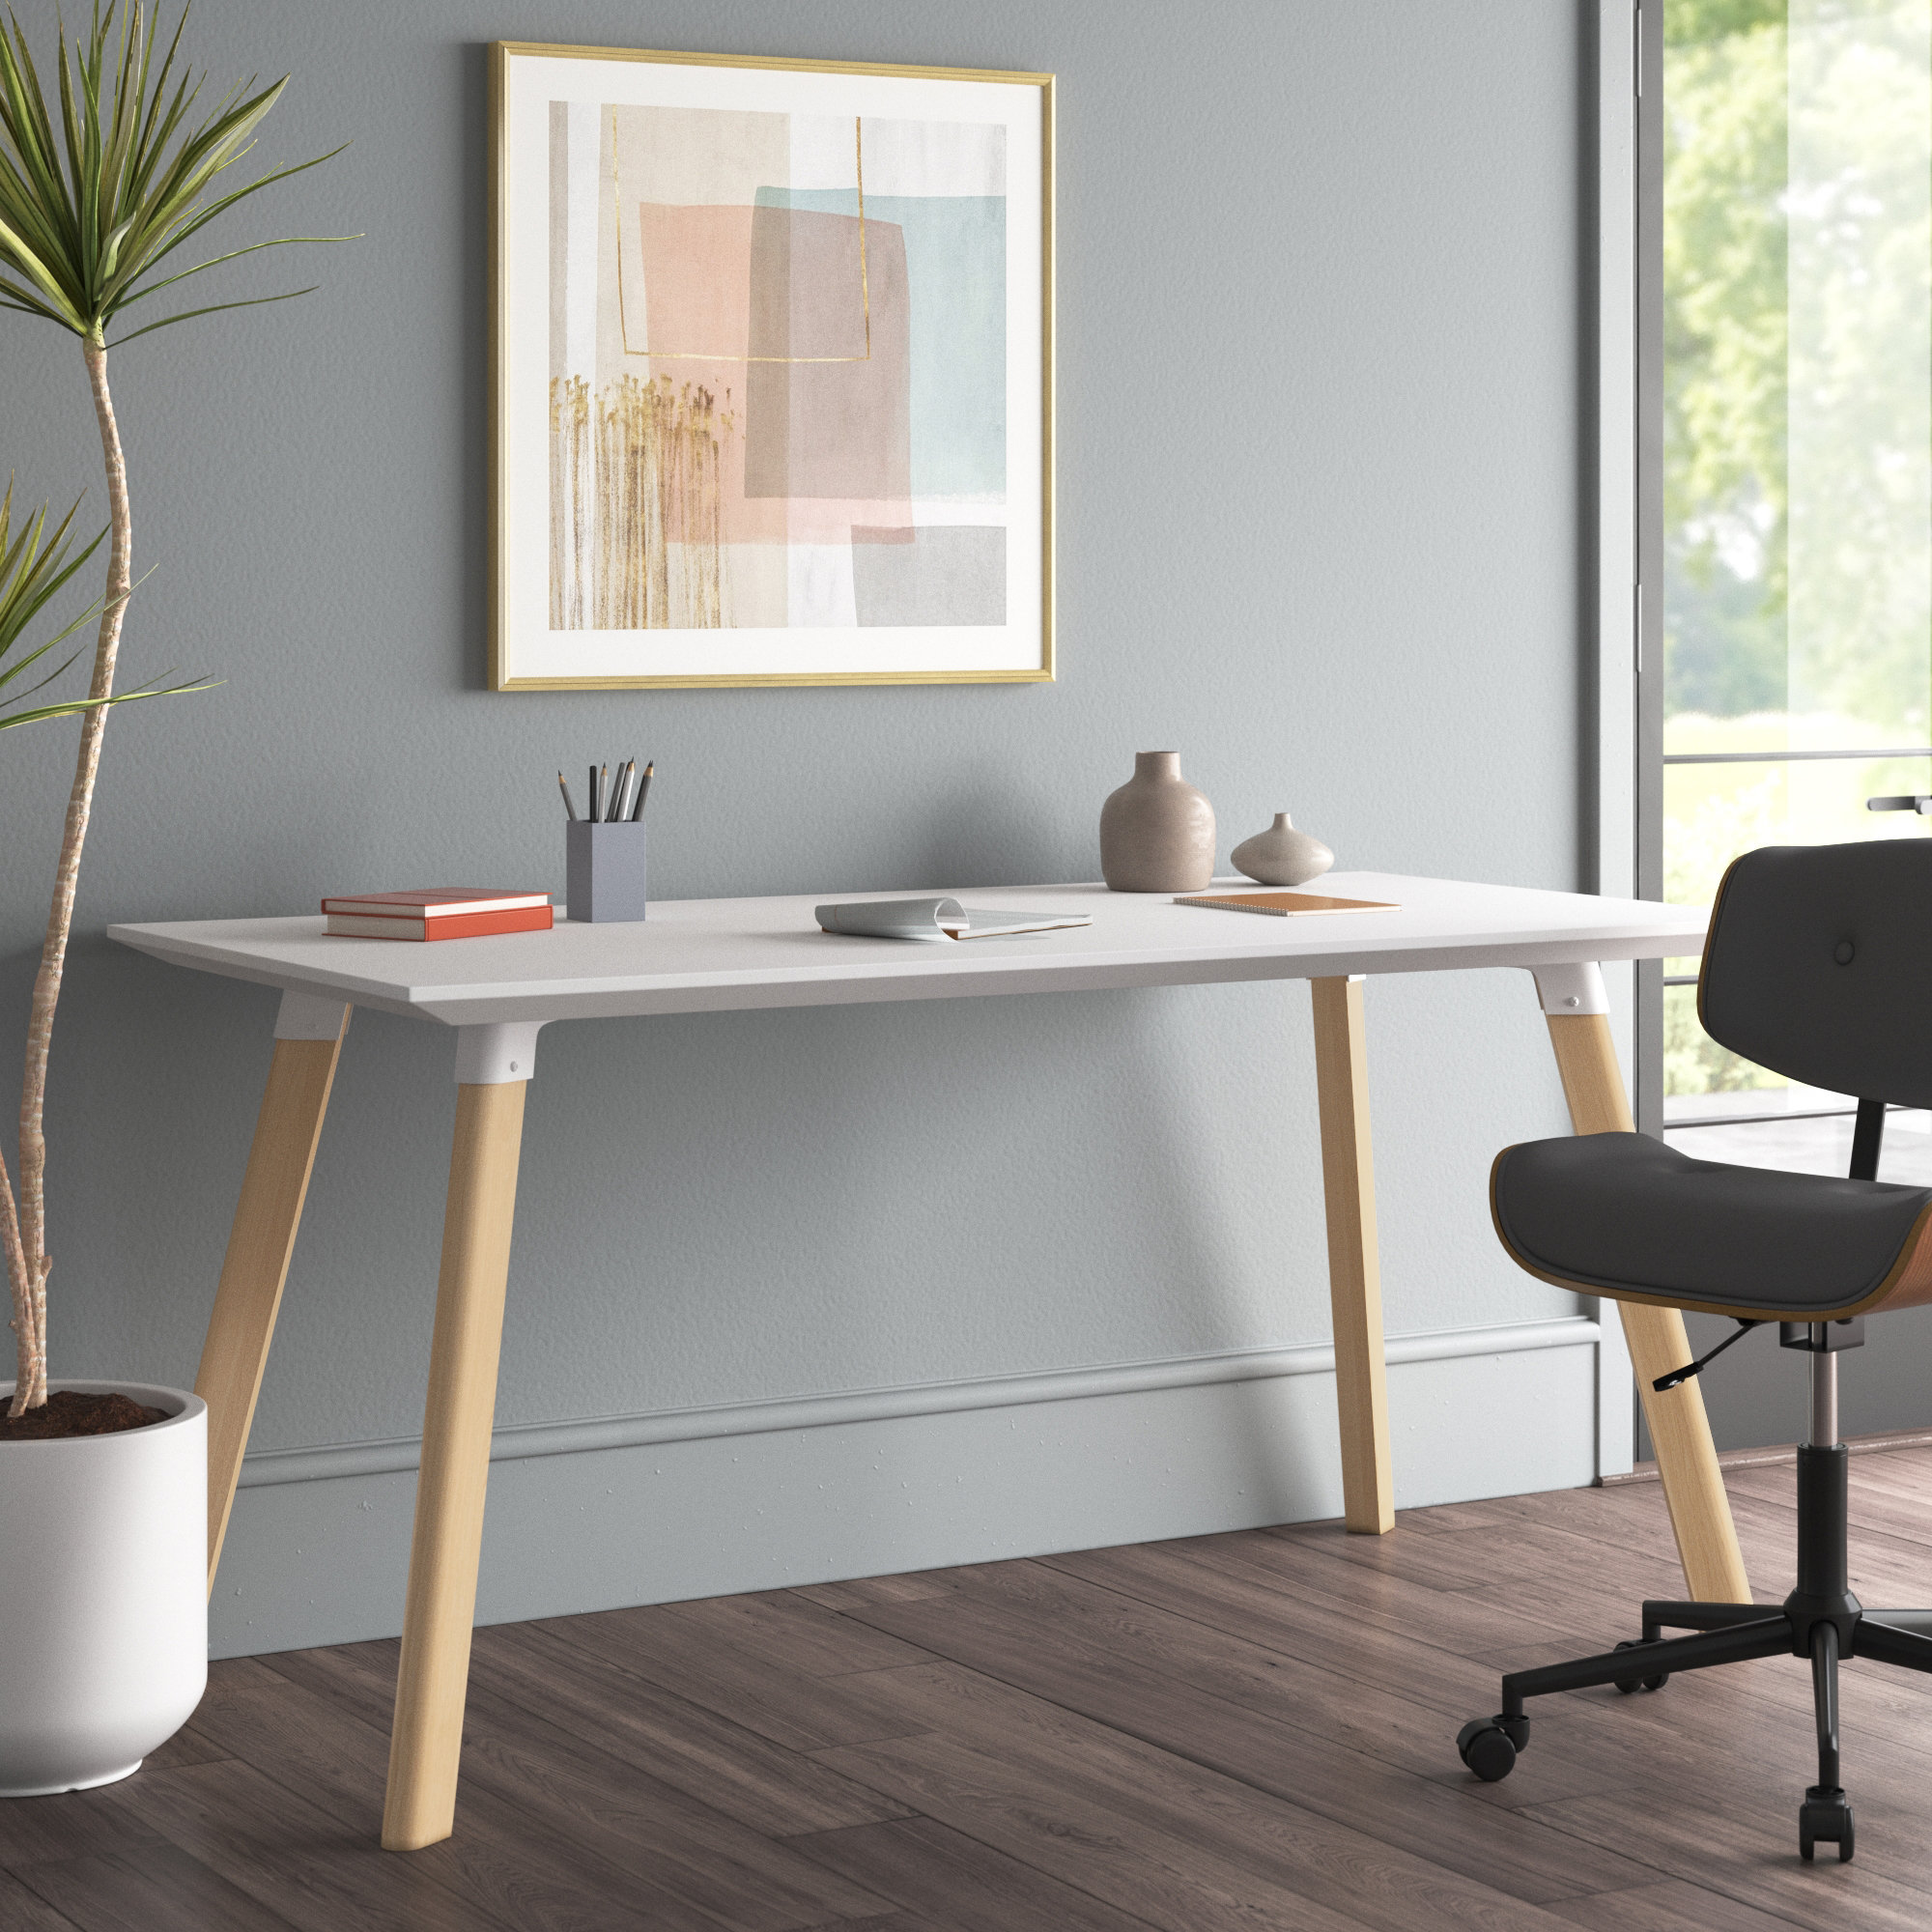 Buy small home office desk At an Exceptional Price - Arad Branding